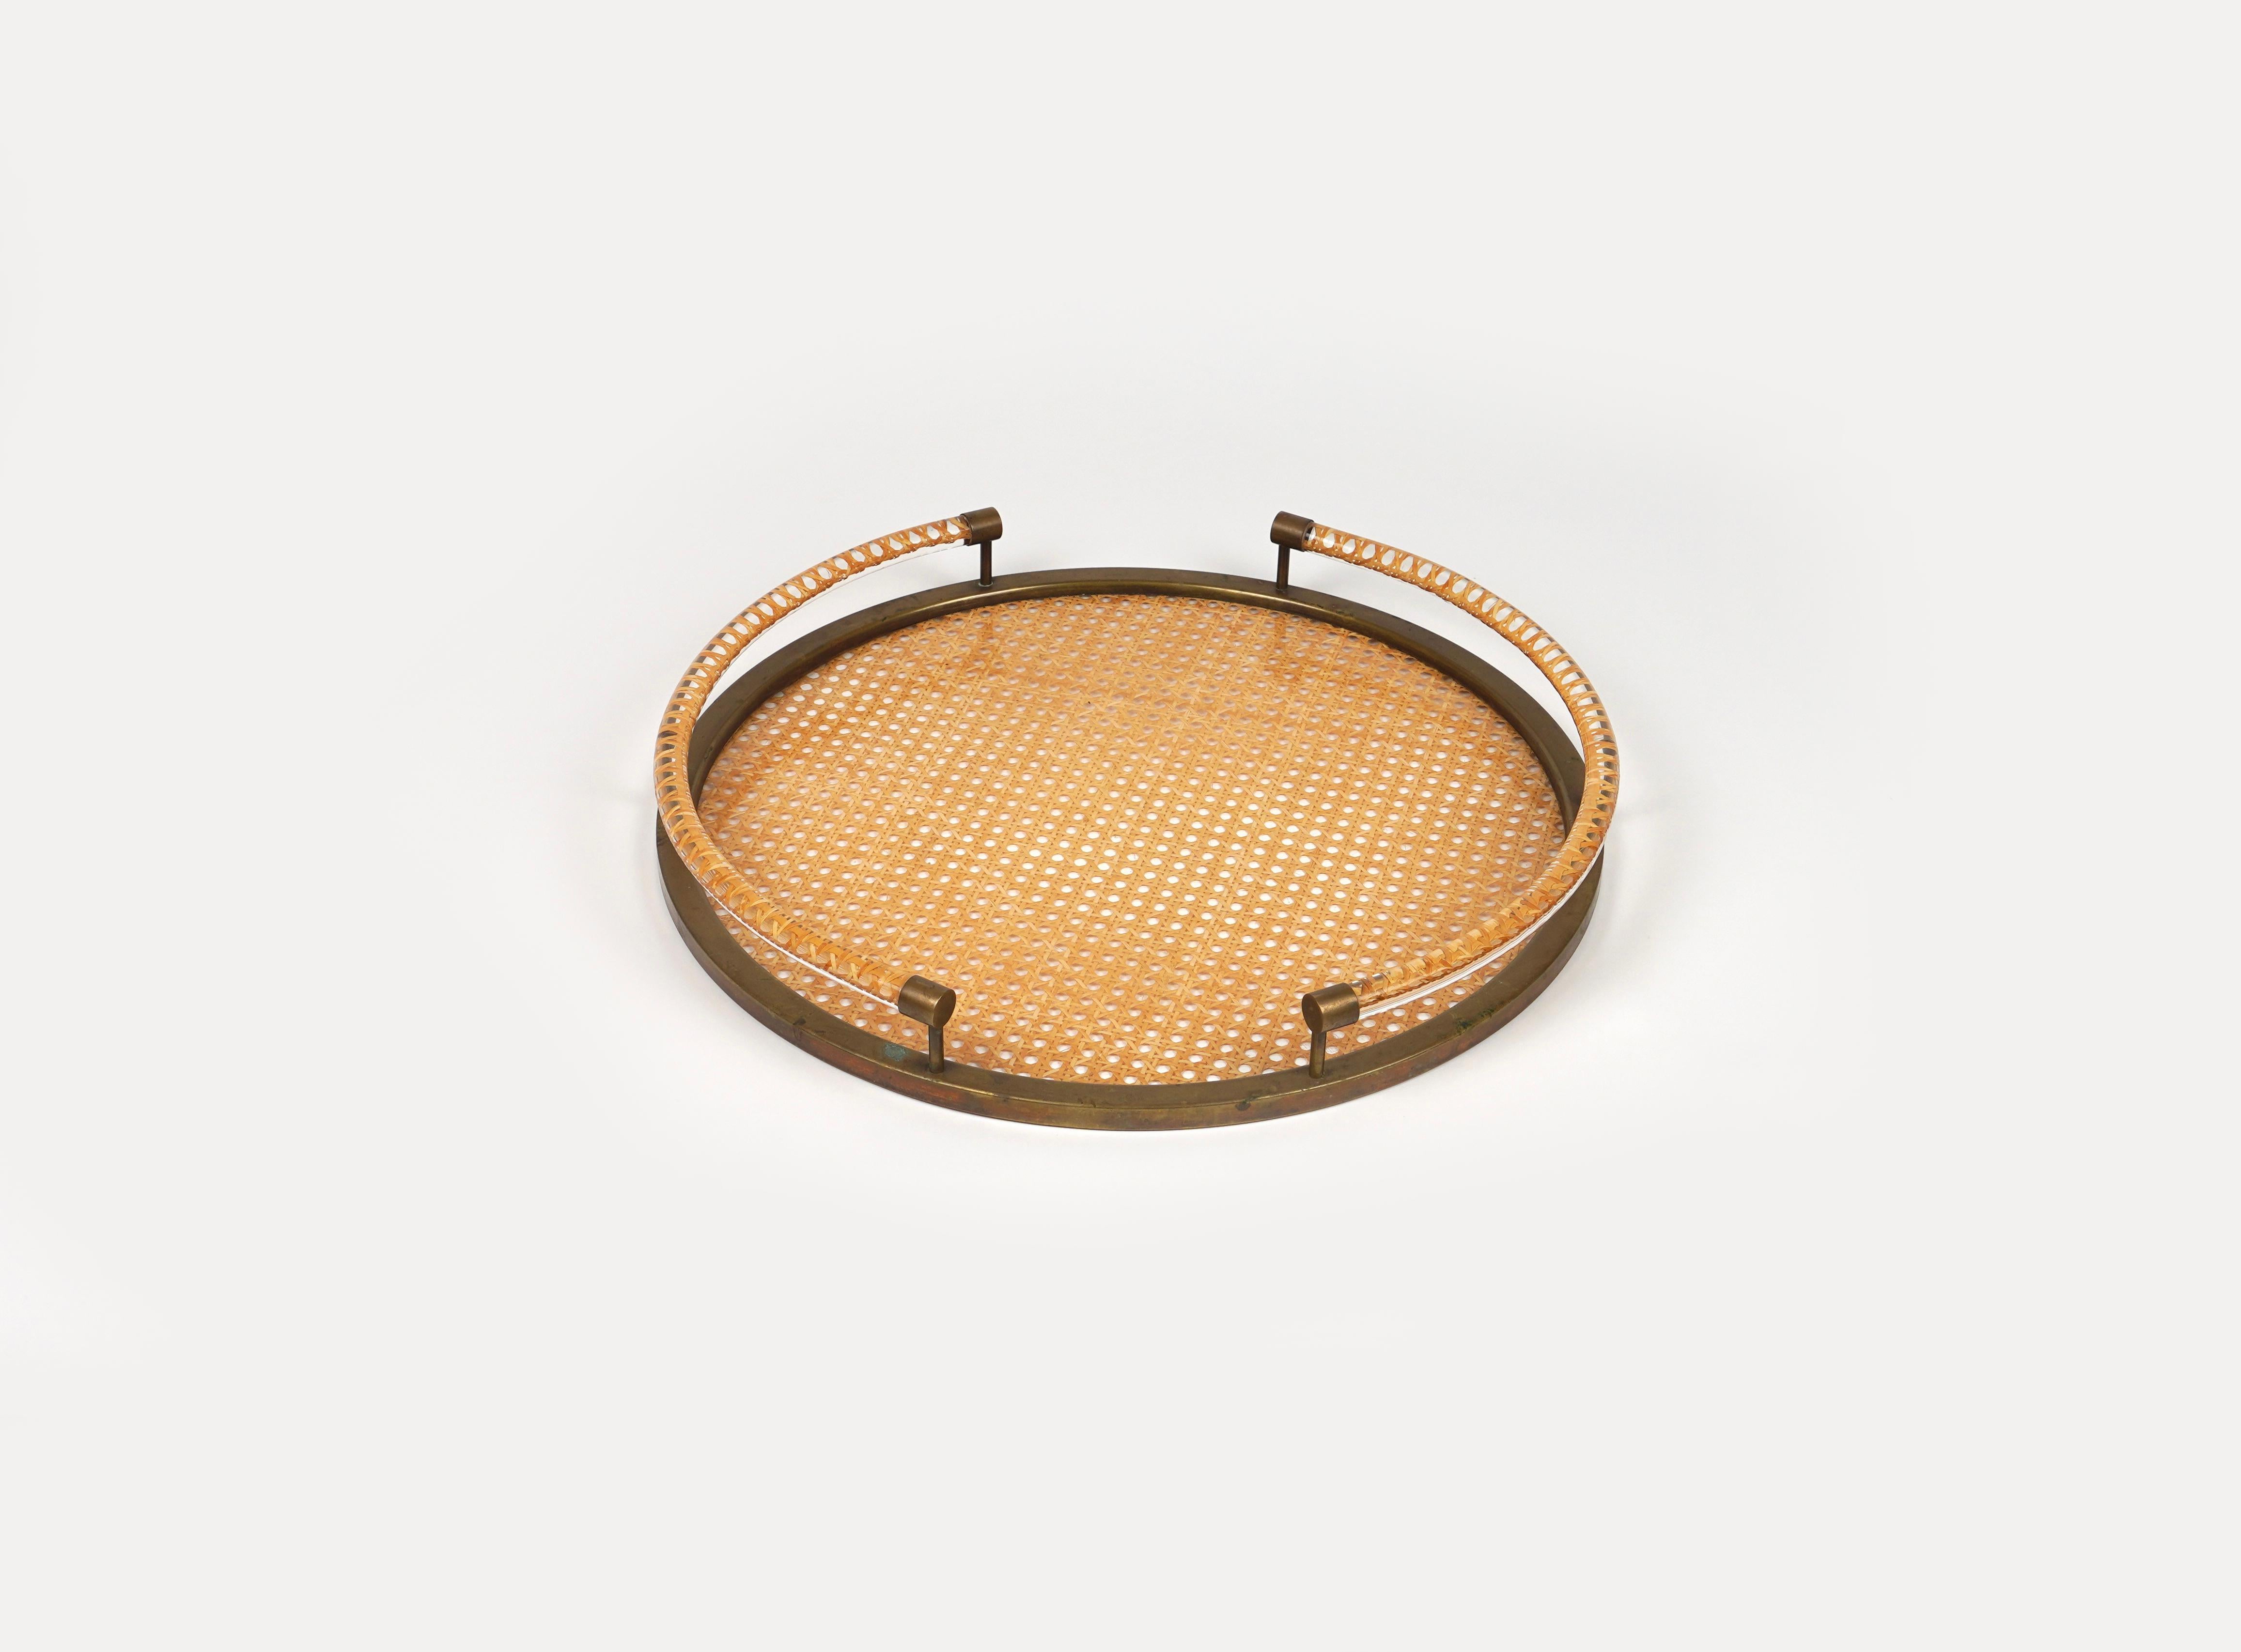 Mid-Century Modern Round Serving Tray in Lucite, Rattan and Brass Christian Dior Style, Italy 1970s